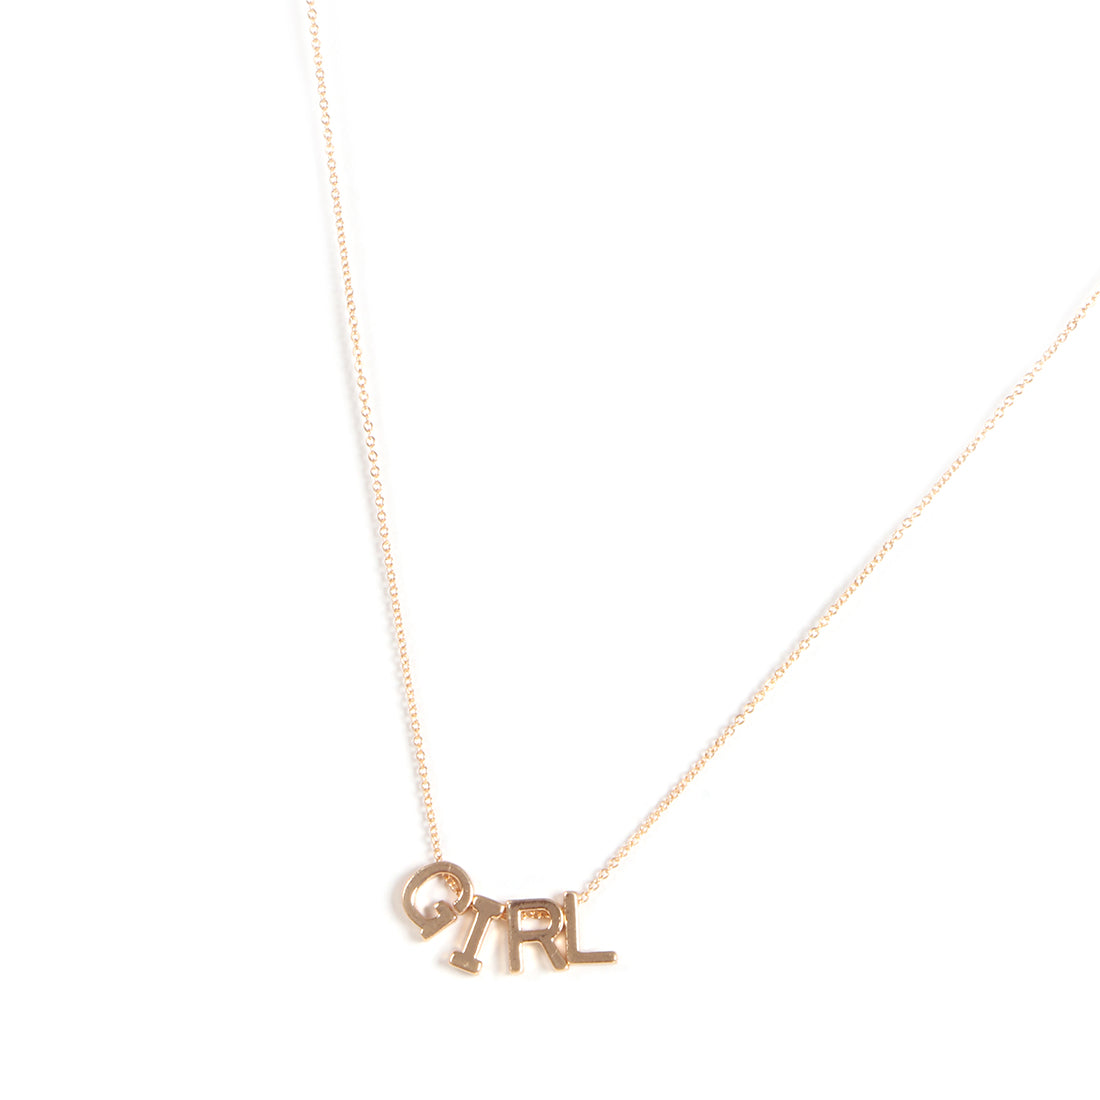 GIRL STATEMENT MINI PENDANT GOLD-TONED DAINTY NECKLACE